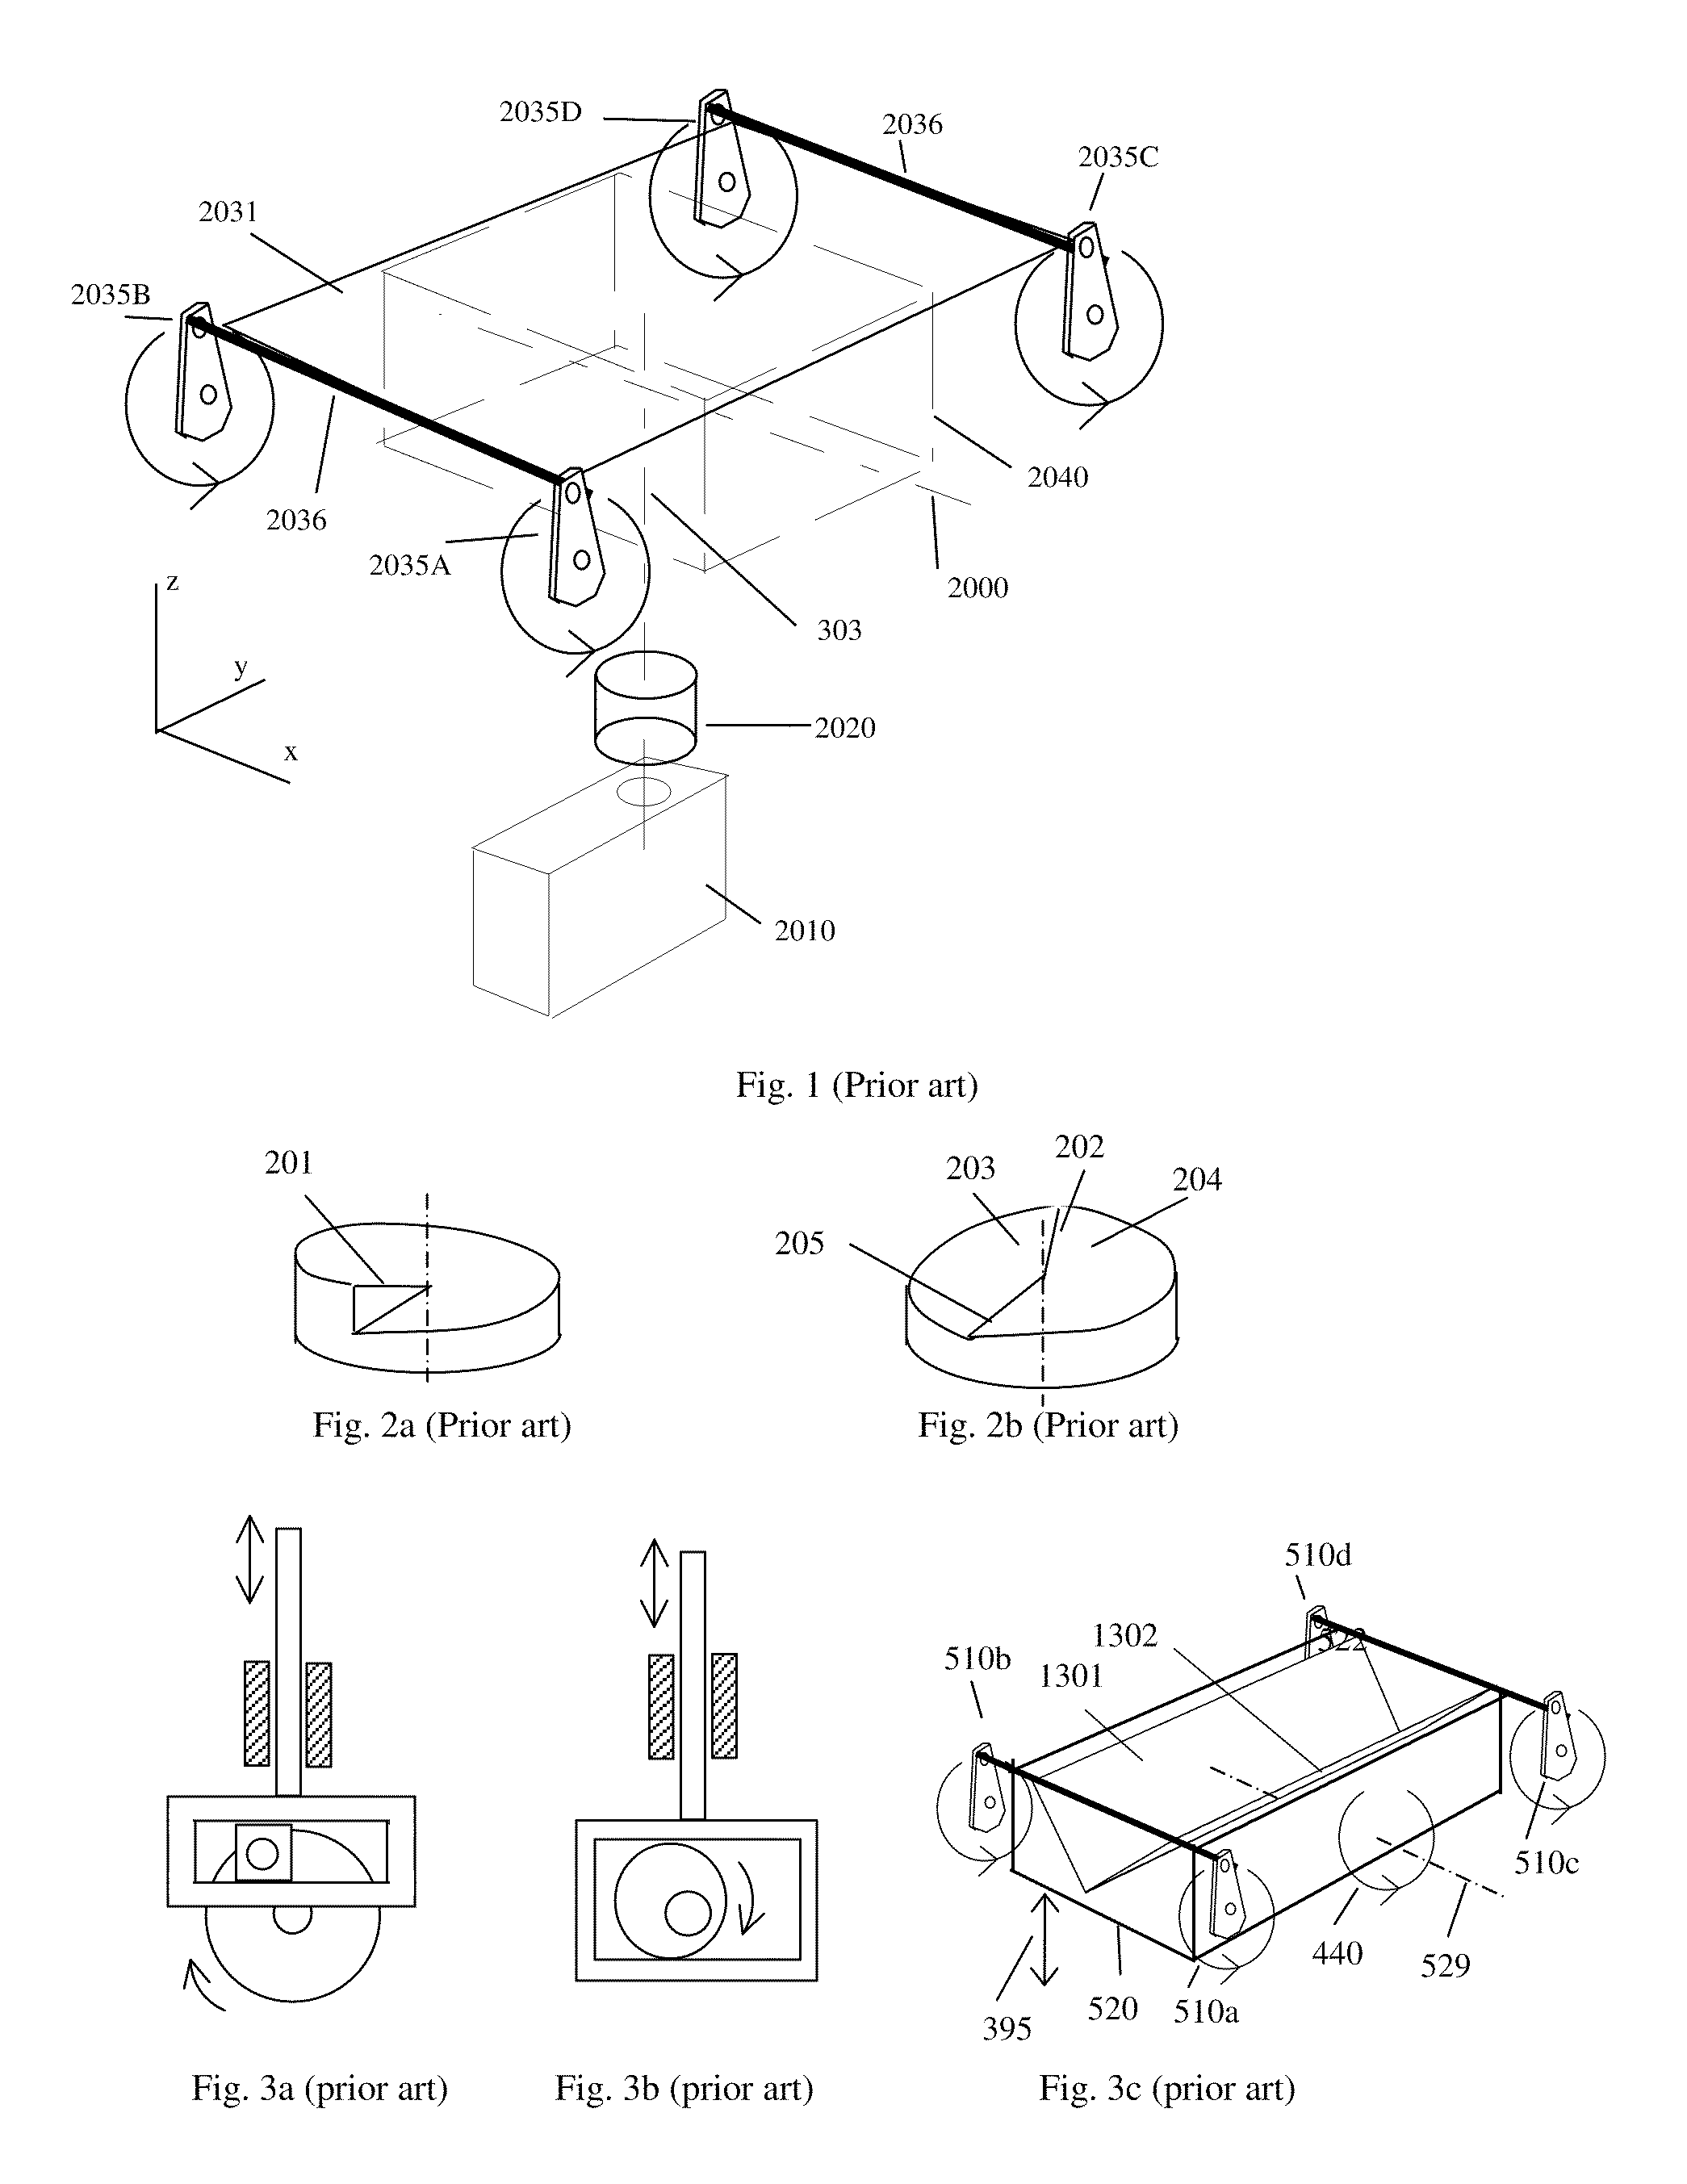 Methods and systems of rapid focusing and zooming for volumetric 3D displays and cameras